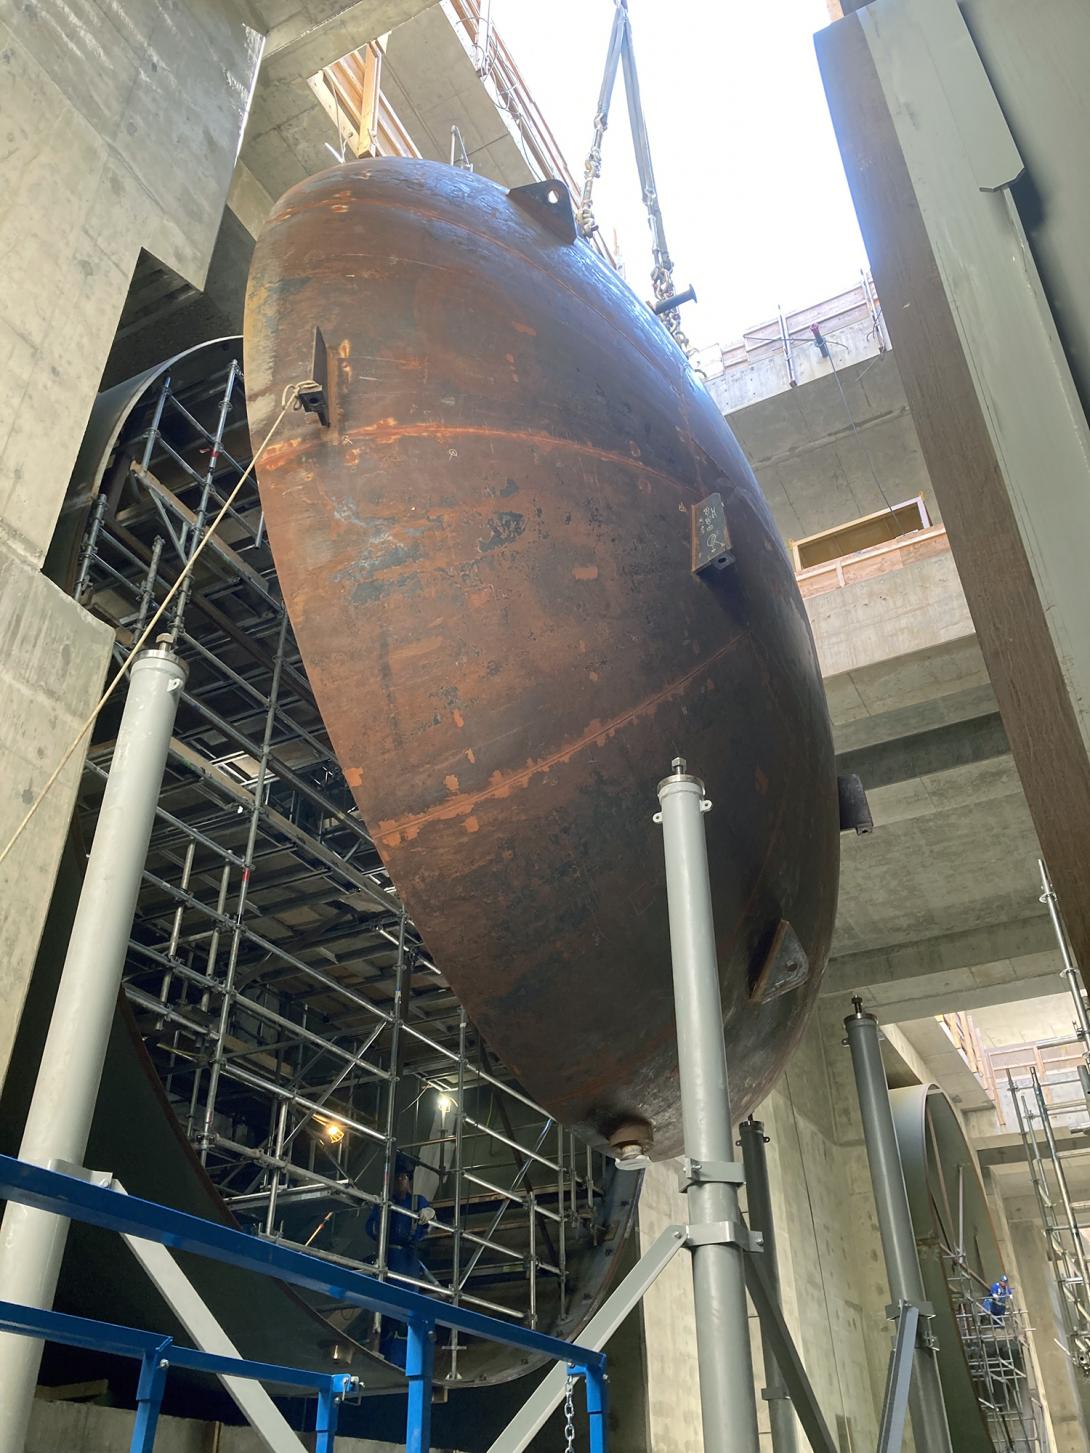 The spiral case bulkhead is welded in place to complete the hydrostatic test and pressurized seal of the spiral case. | July 2021